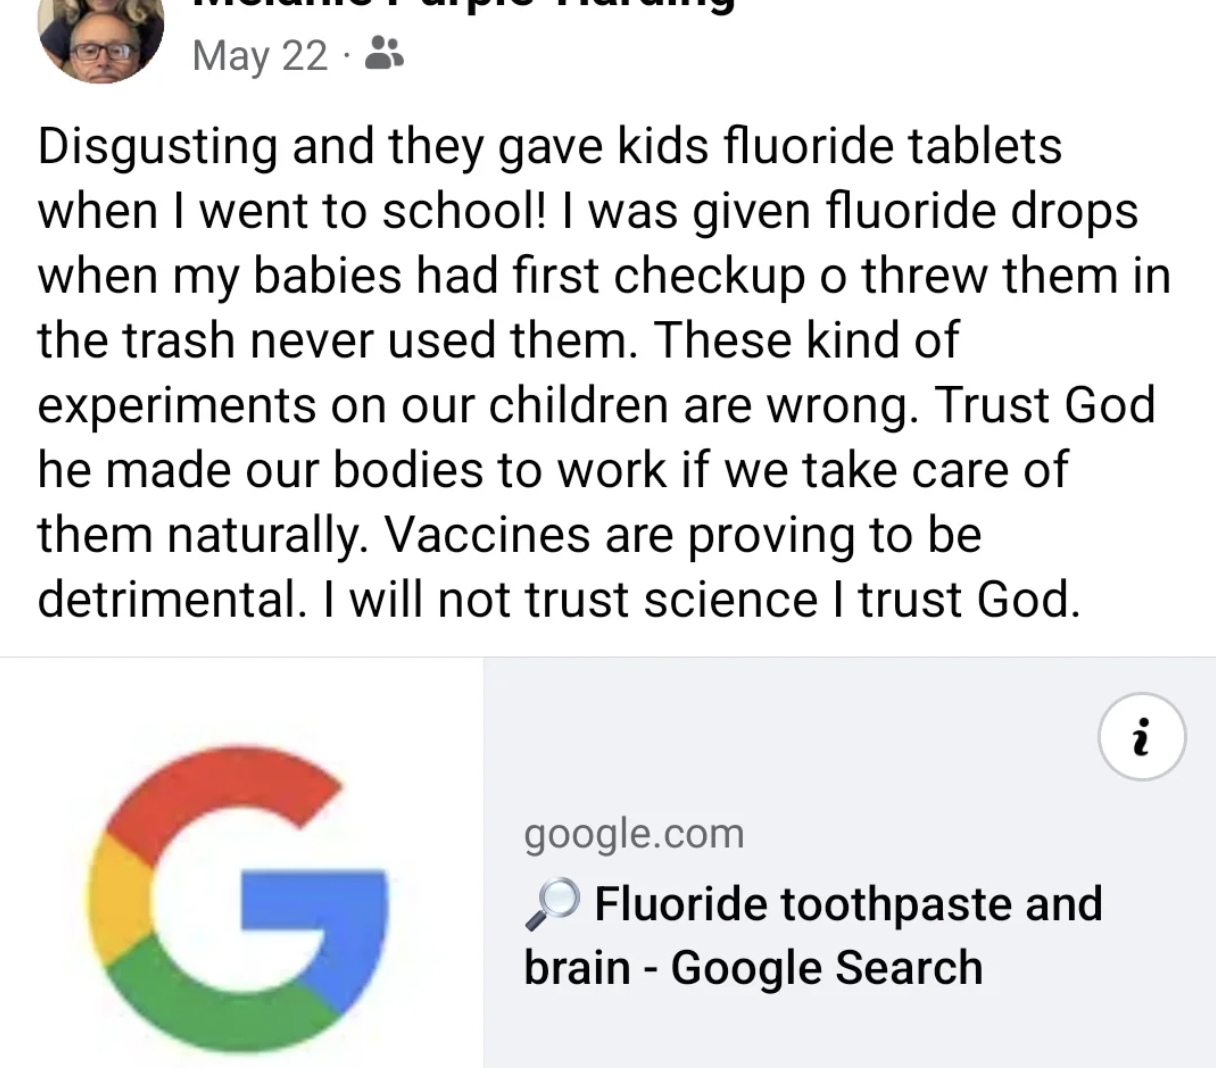 screenshot - May 22. Disgusting and they gave kids fluoride tablets when I went to school! I was given fluoride drops when my babies had first checkup o threw them in the trash never used them. These kind of experiments on our children are wrong. Trust Go